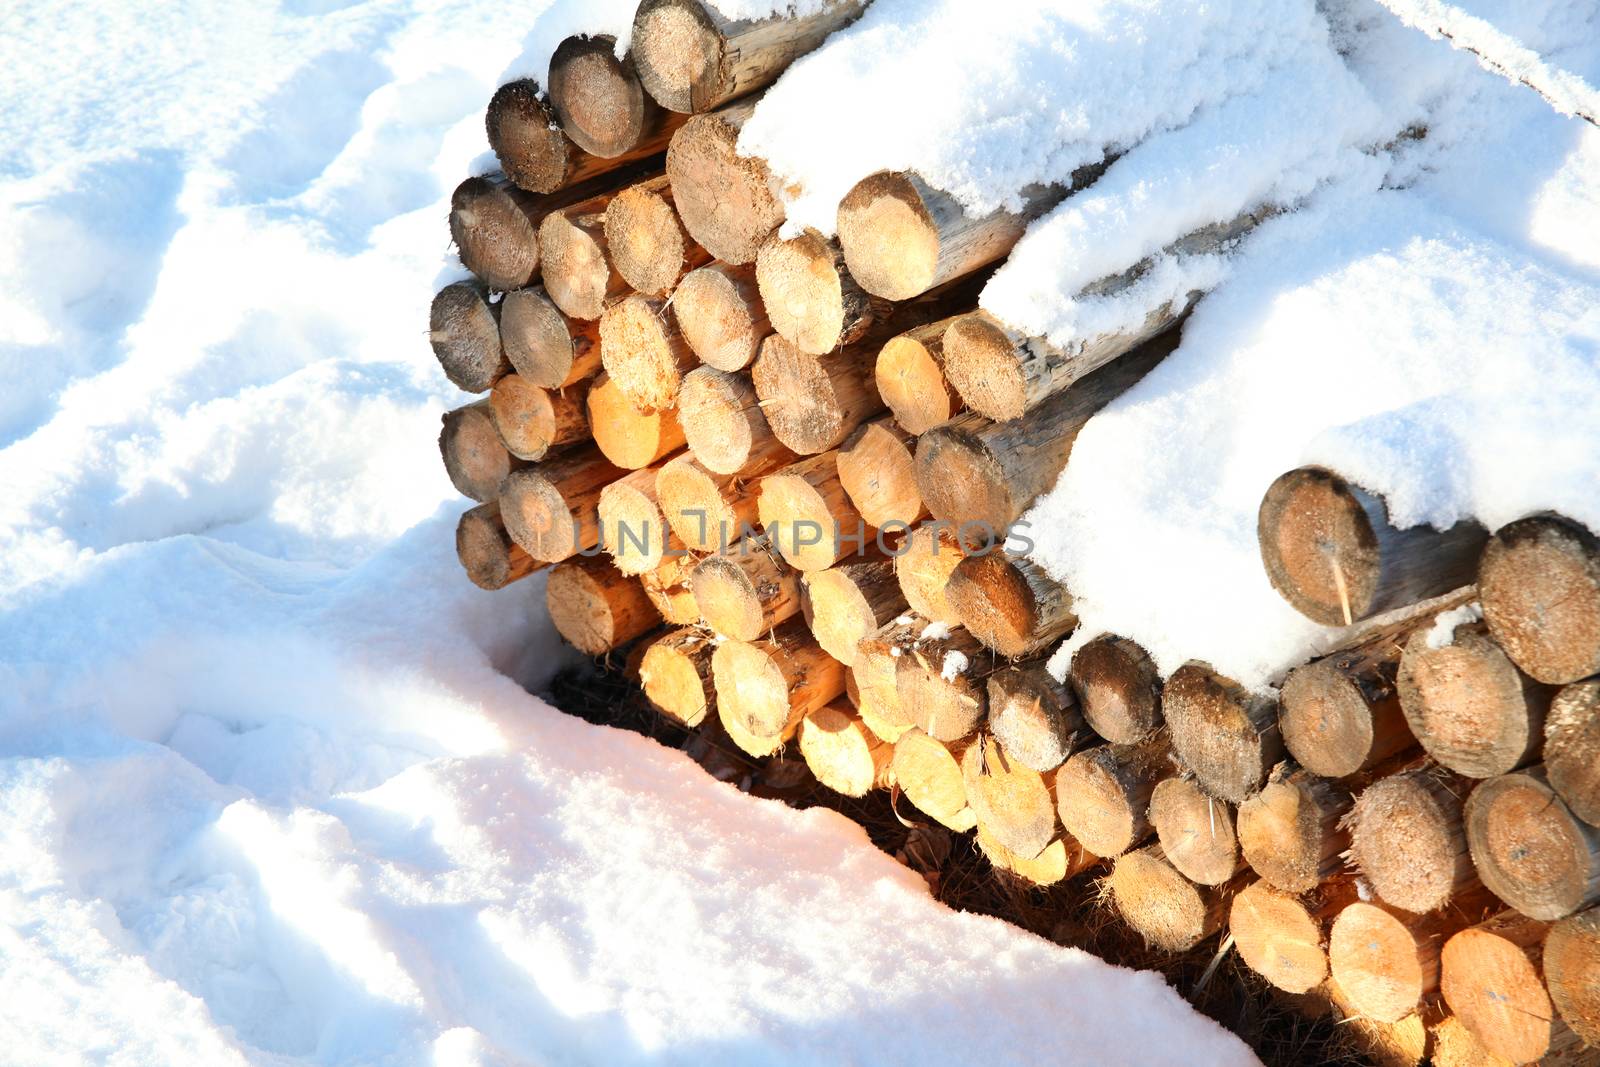 Wood bundle of rails covered in snow